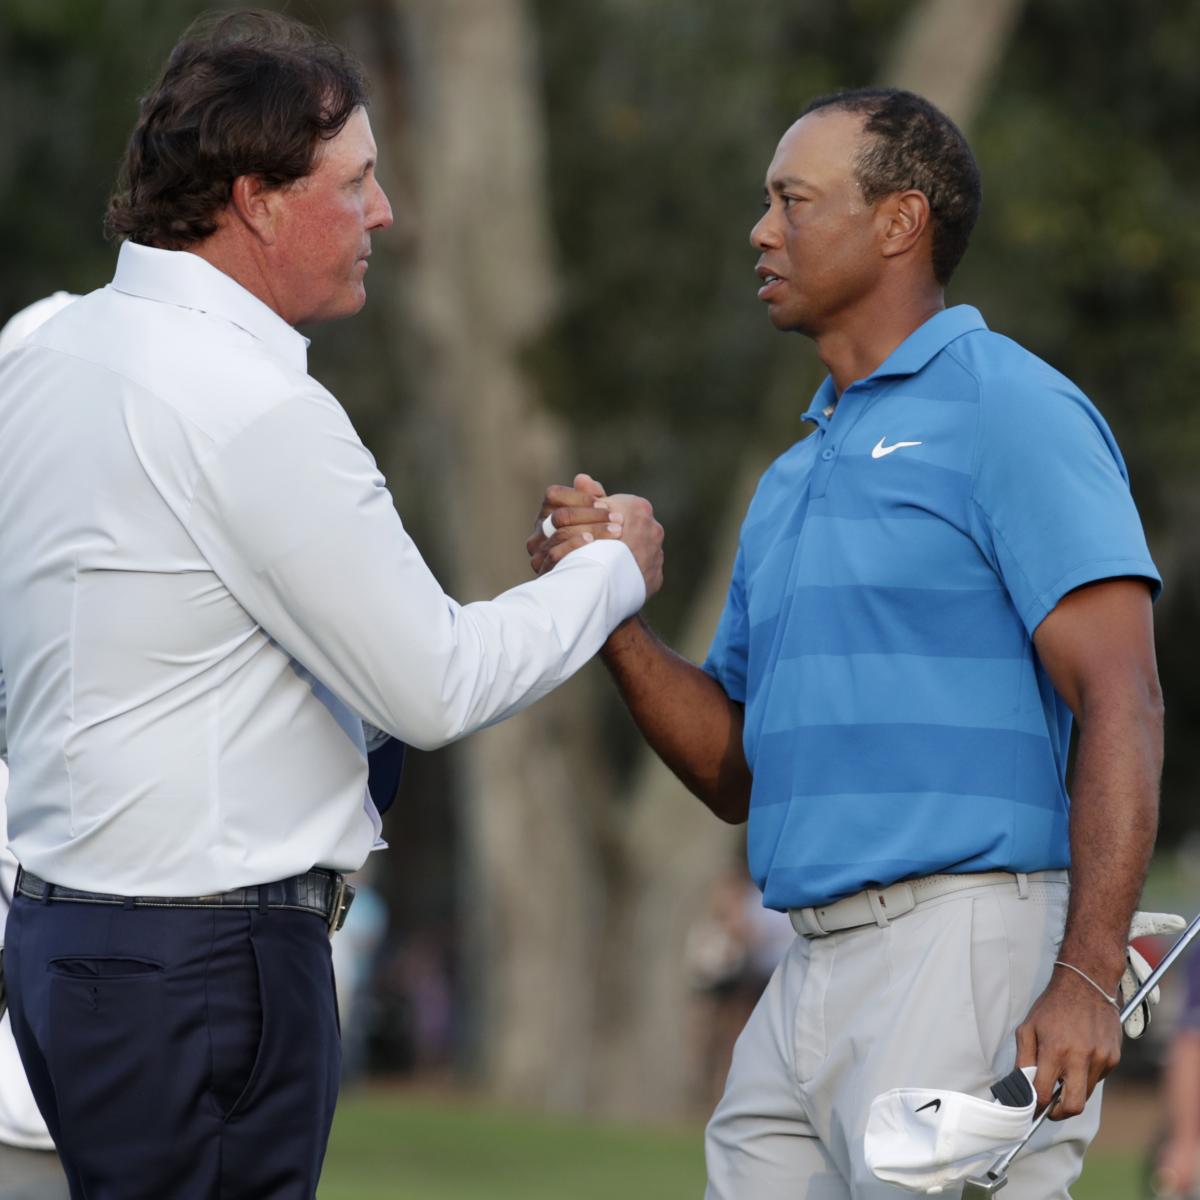 Capital One's The Match Everything You Need to Know About Tiger vs